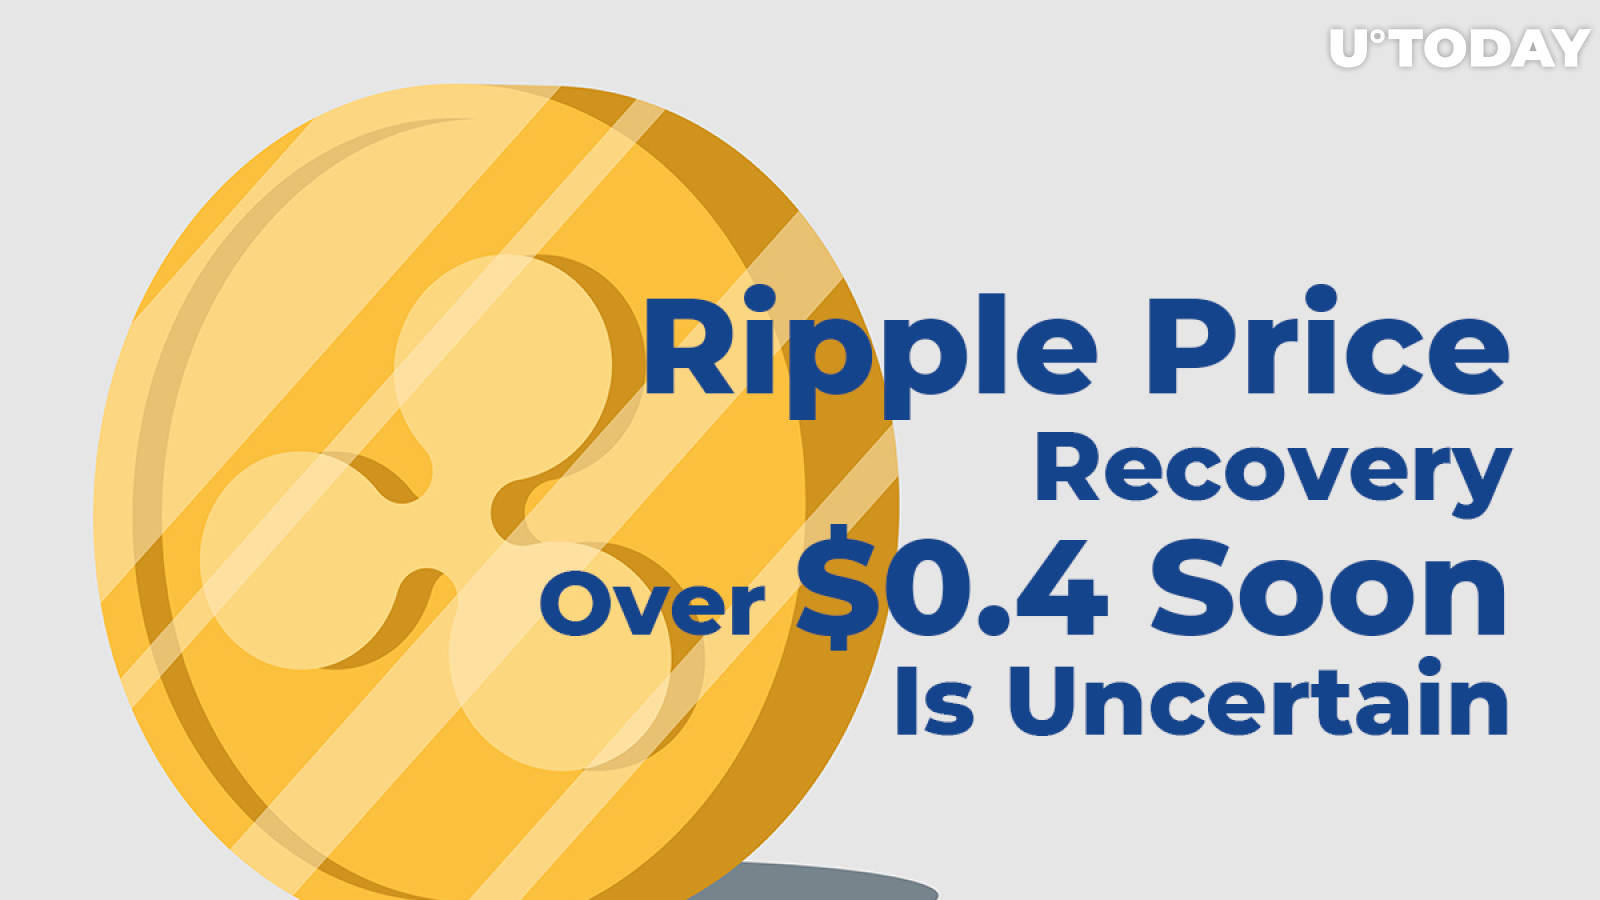 Ripple (XRP) Price Recovery Over $0.4 Soon Is Uncertain